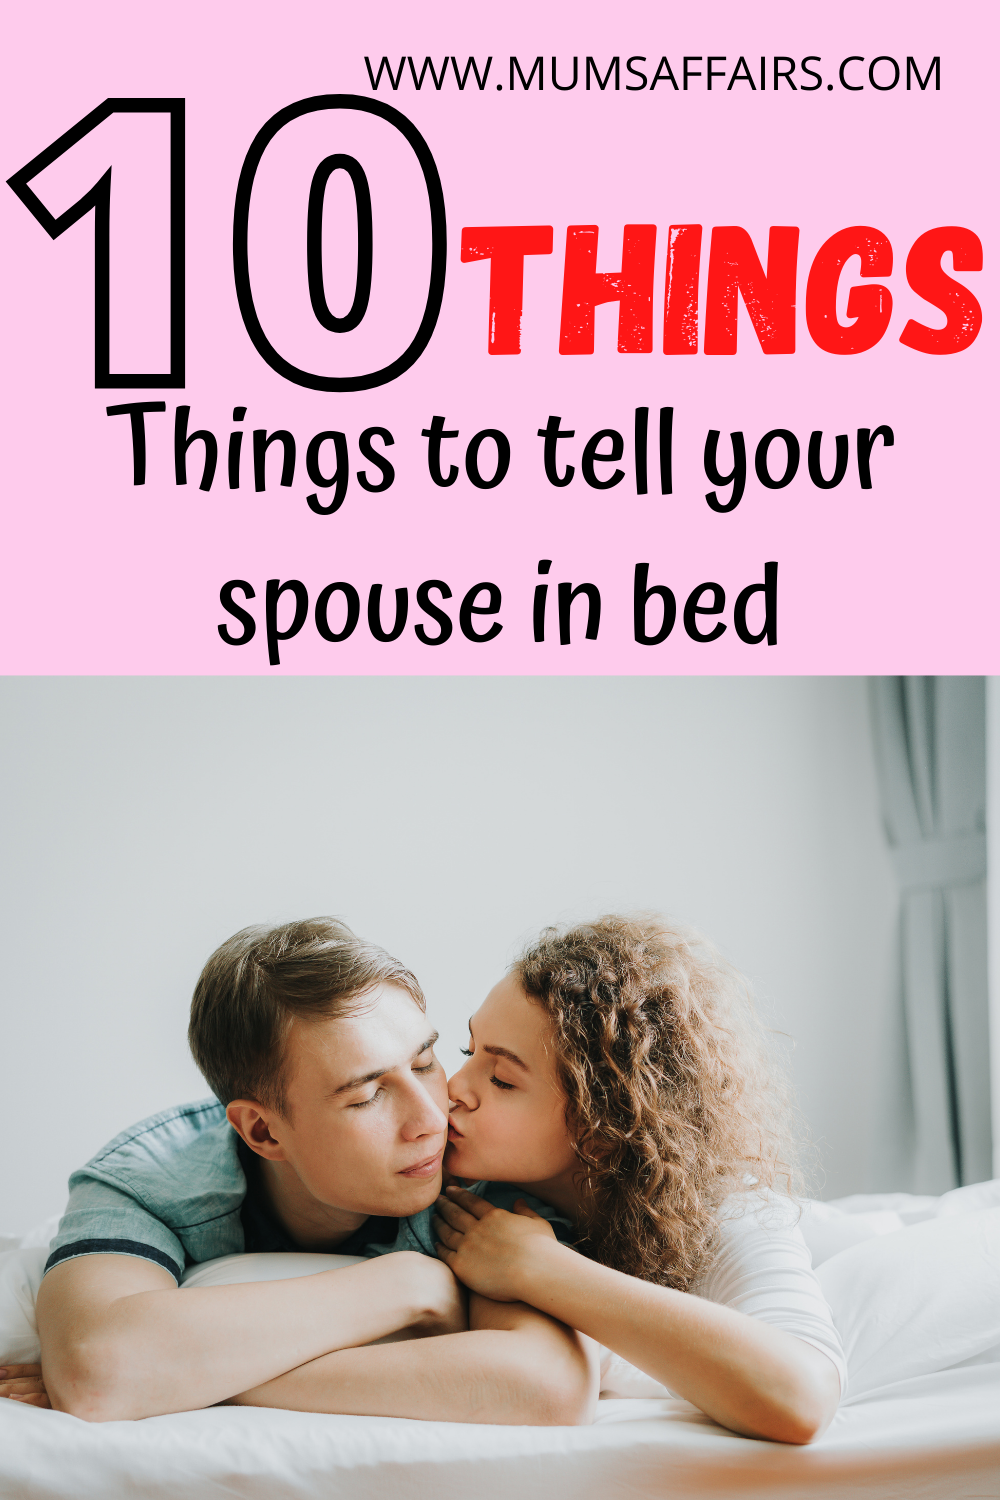 10 Reasons to tell your spouse in bed